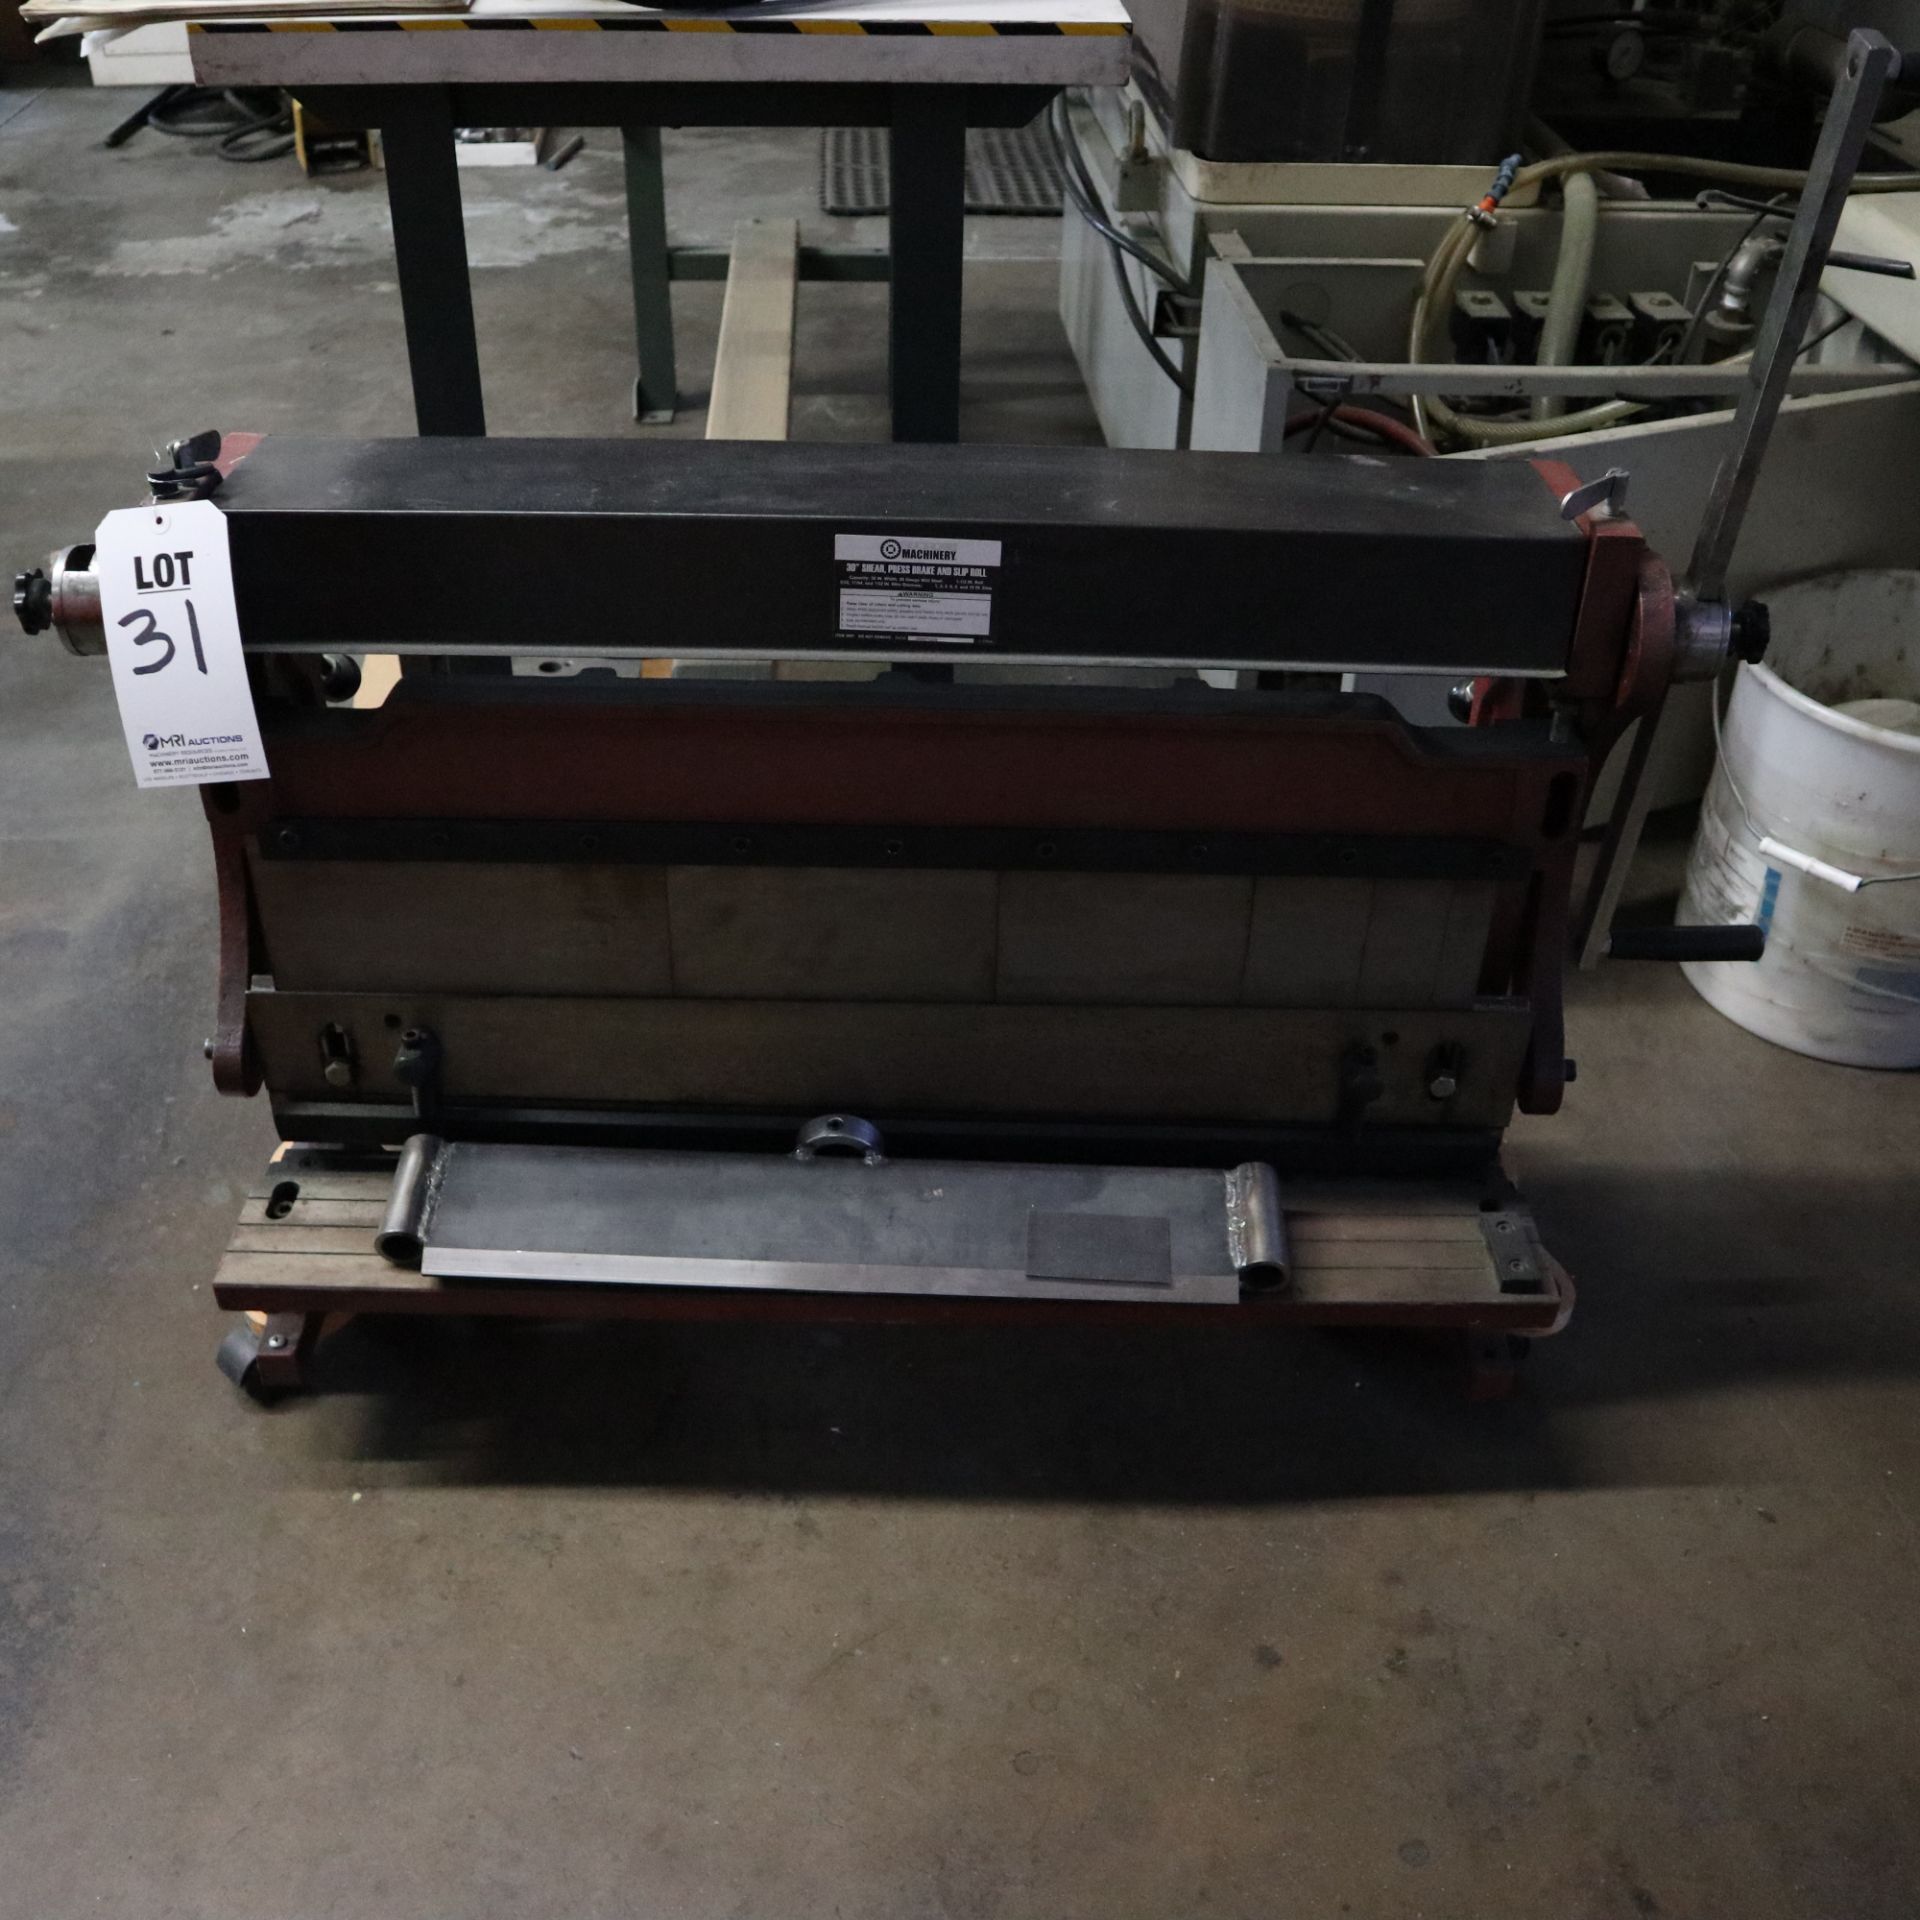 CENTRAL MACHINERY 30" SHEAR AND PRESS BRAKE, 30" WIDTH, 1", 2", 3", 6", 8", 10" DIES